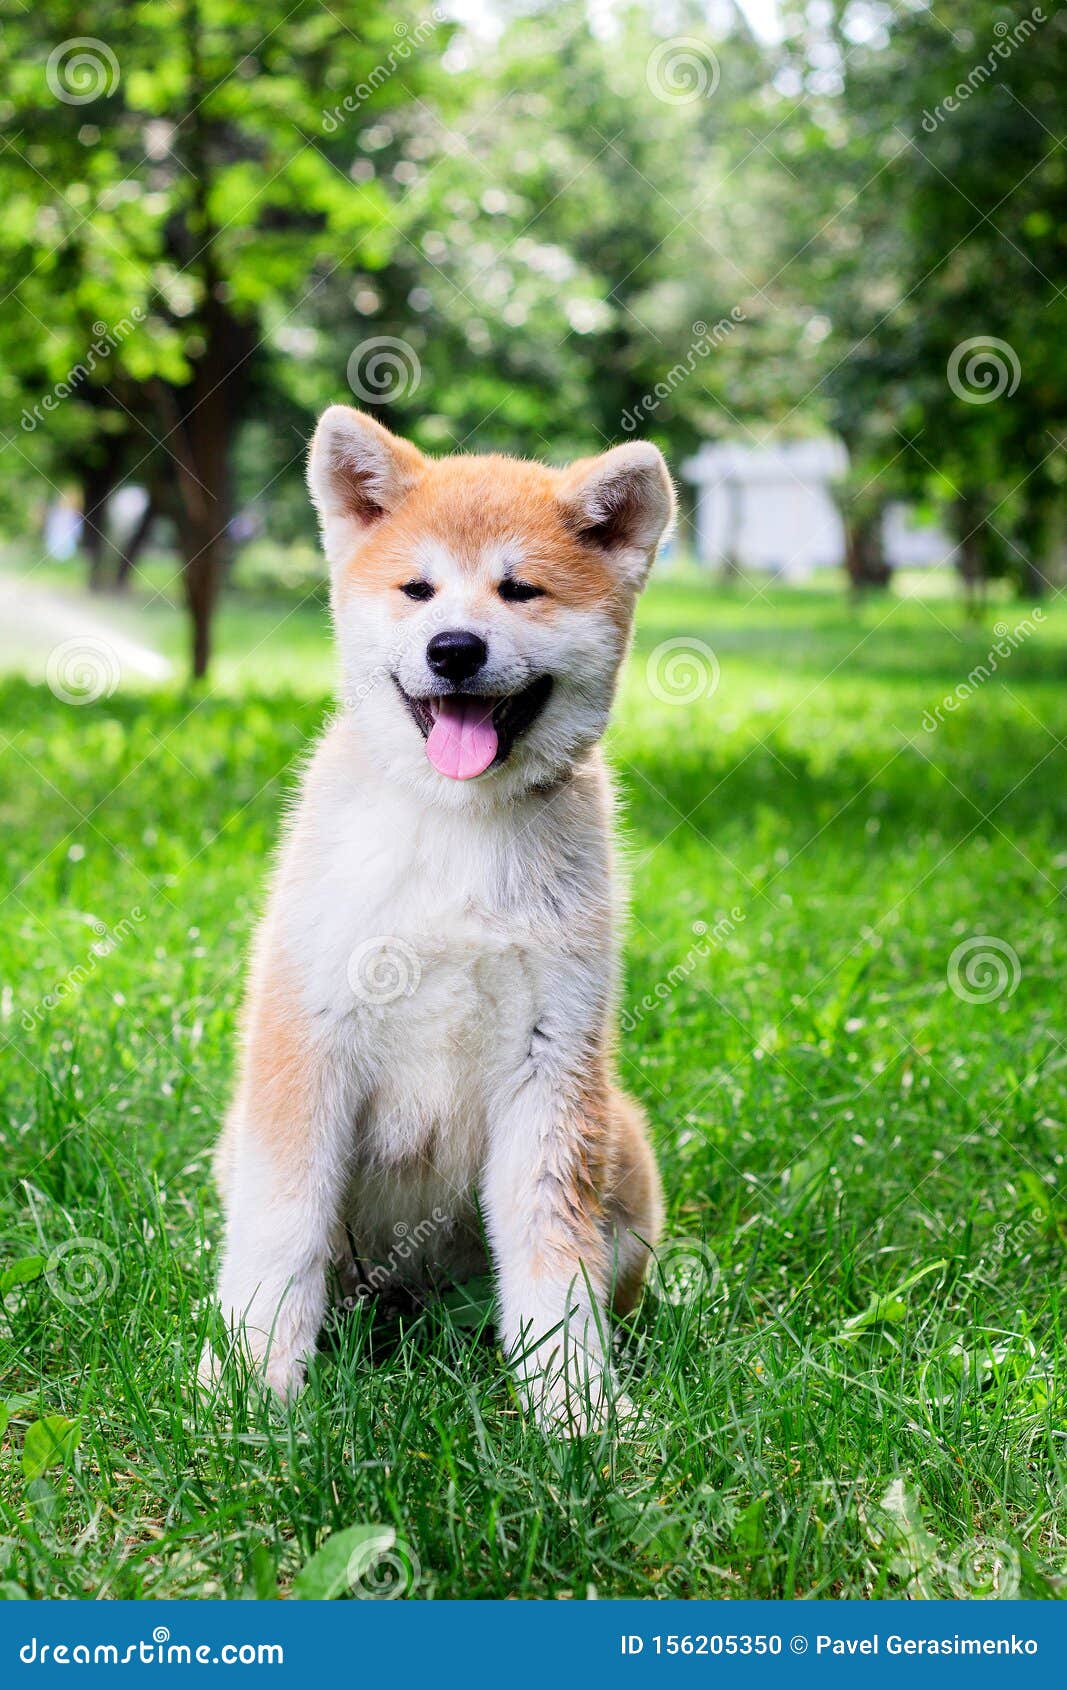 A Small Puppy Of A Thoroughbred Japanese Dog Akita Inu In